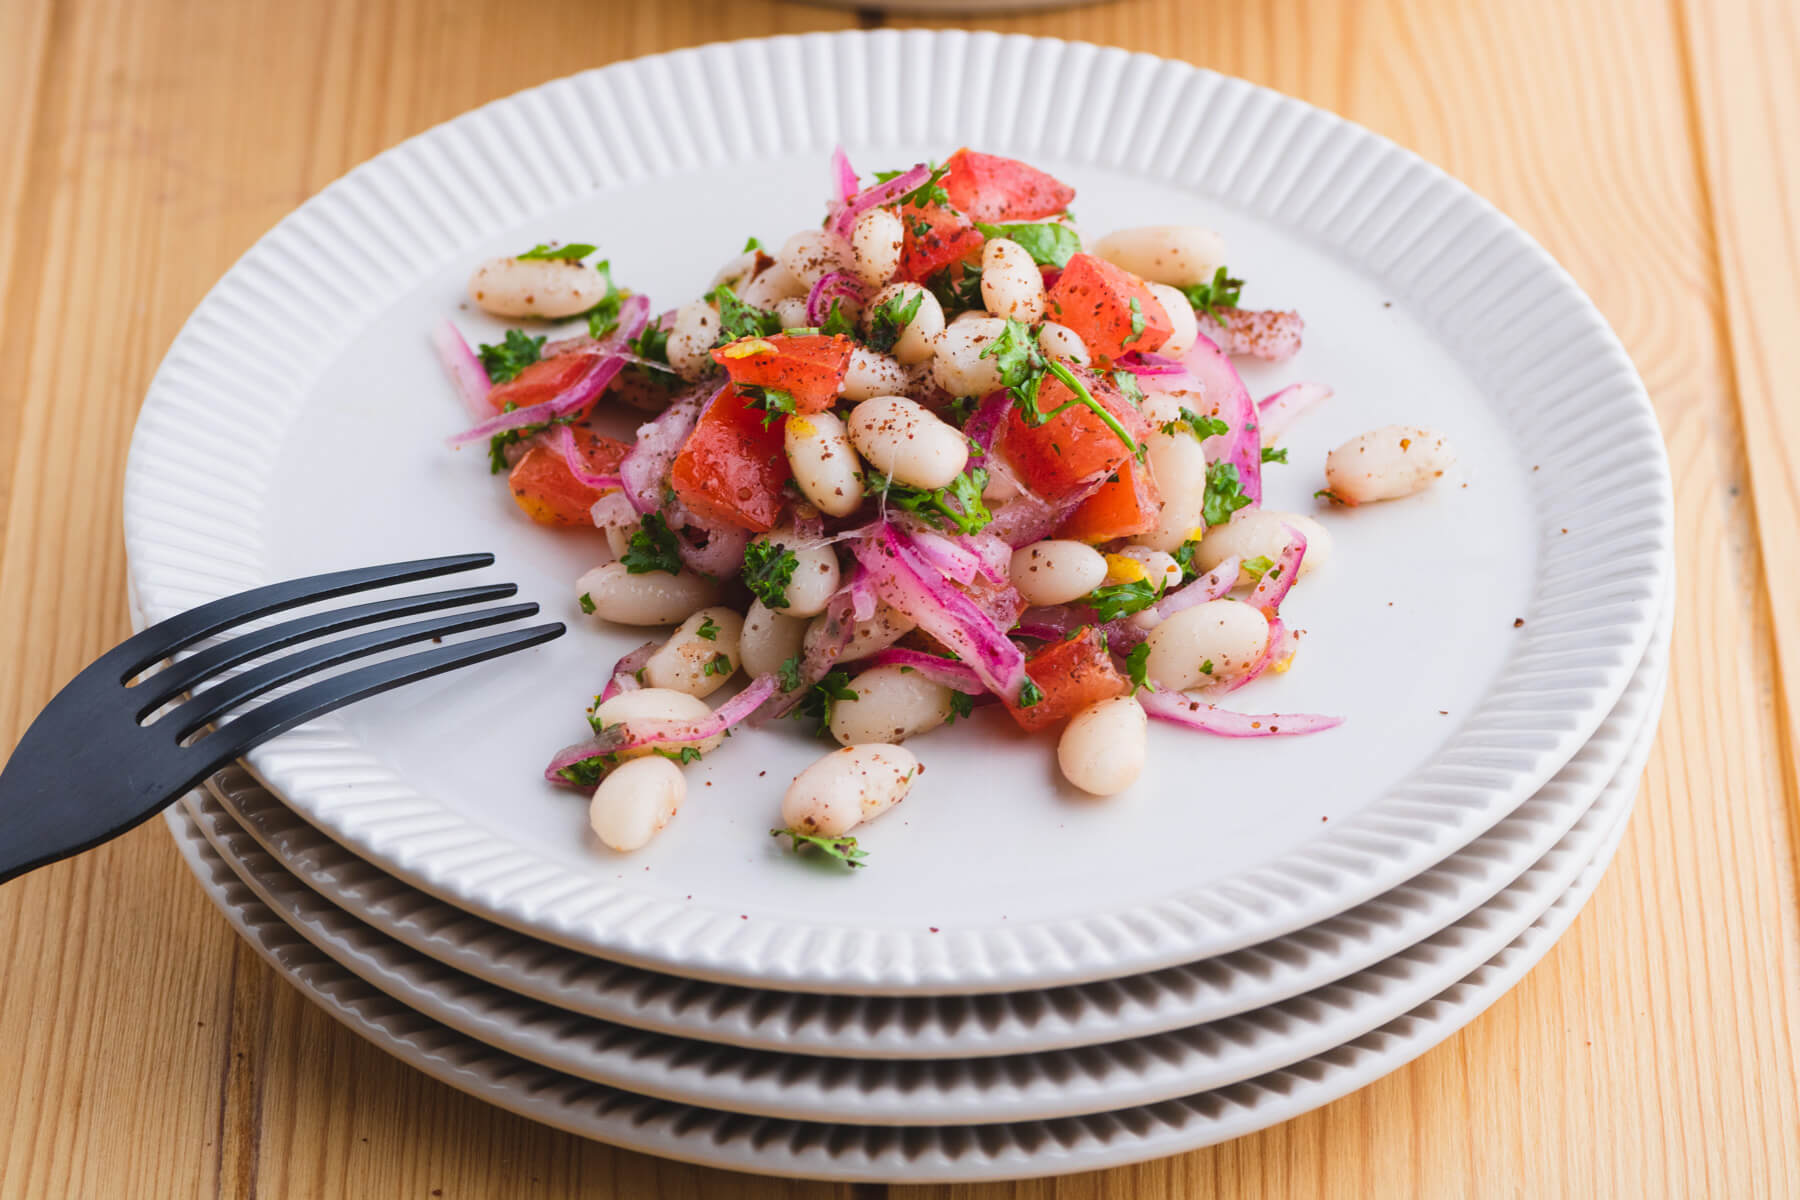 A serving of colourful white bean salad with red onions, tomatoes, and green curly parsley on a white plate.